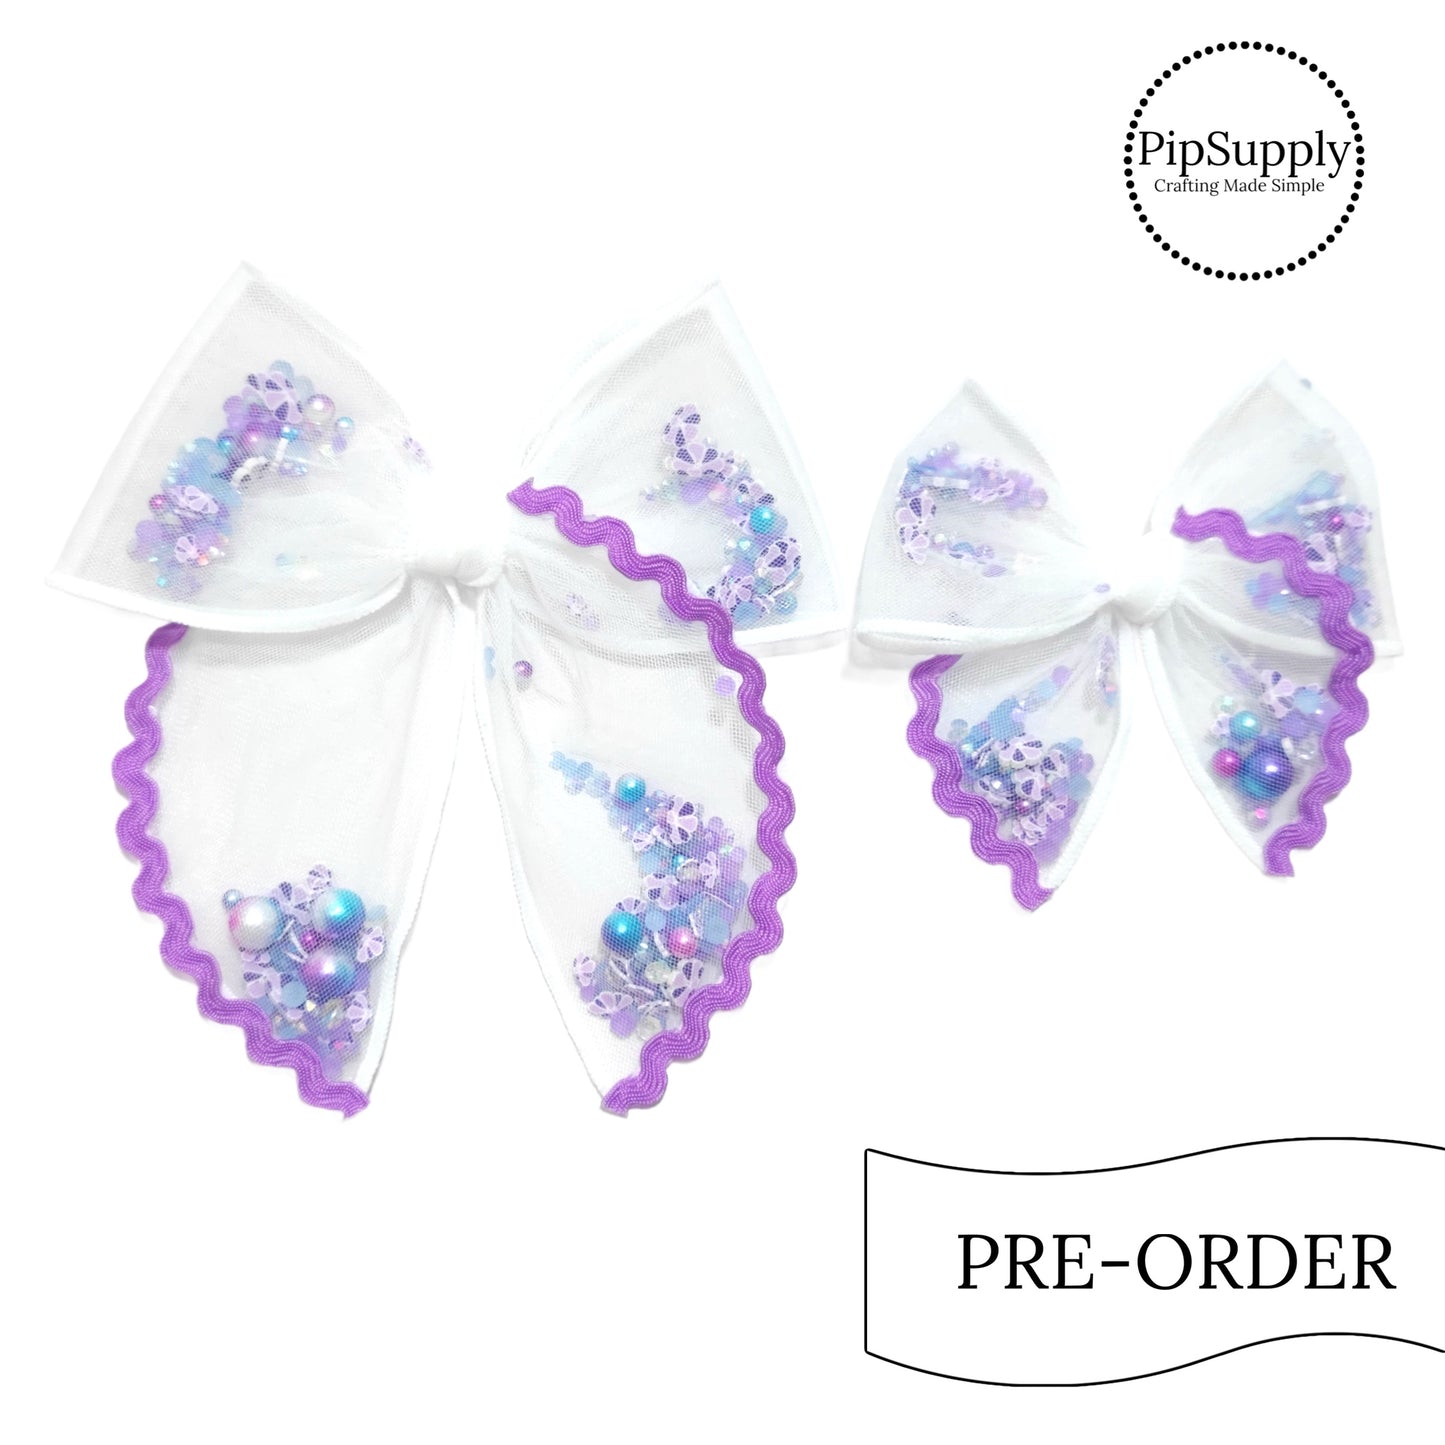 PRE-ORDER Purple Ric Rac Pearl Seashell Pre-Filled Tied Shaker Hair Bow w/Clip (estimated to ship the w/o May 27thth)